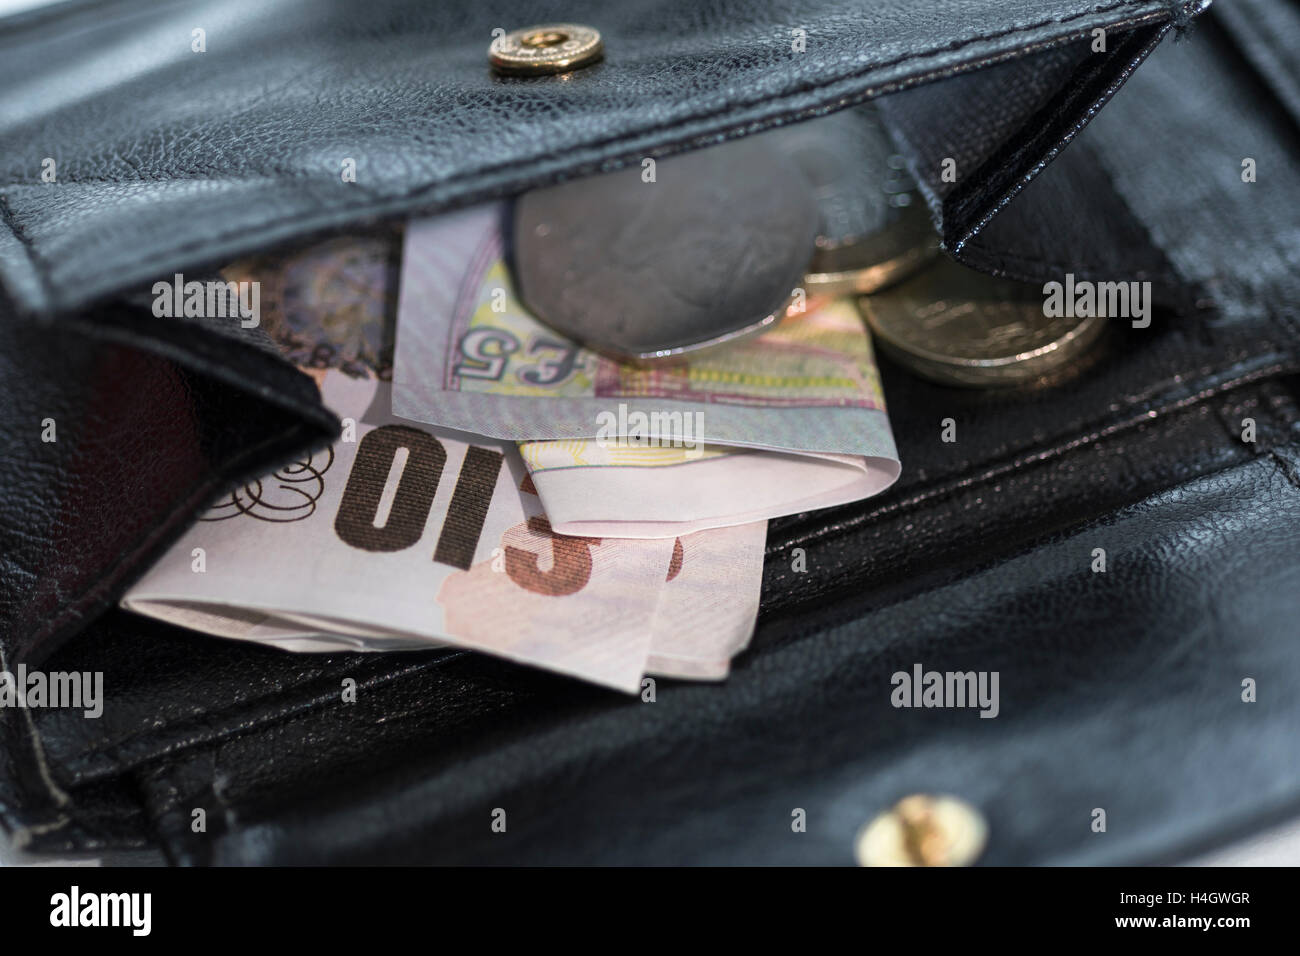 Picture of open purse/wallet revealing loose change & money - metaphor for 'rising cost of living' , affordability, shop prices, low income concept. Stock Photo